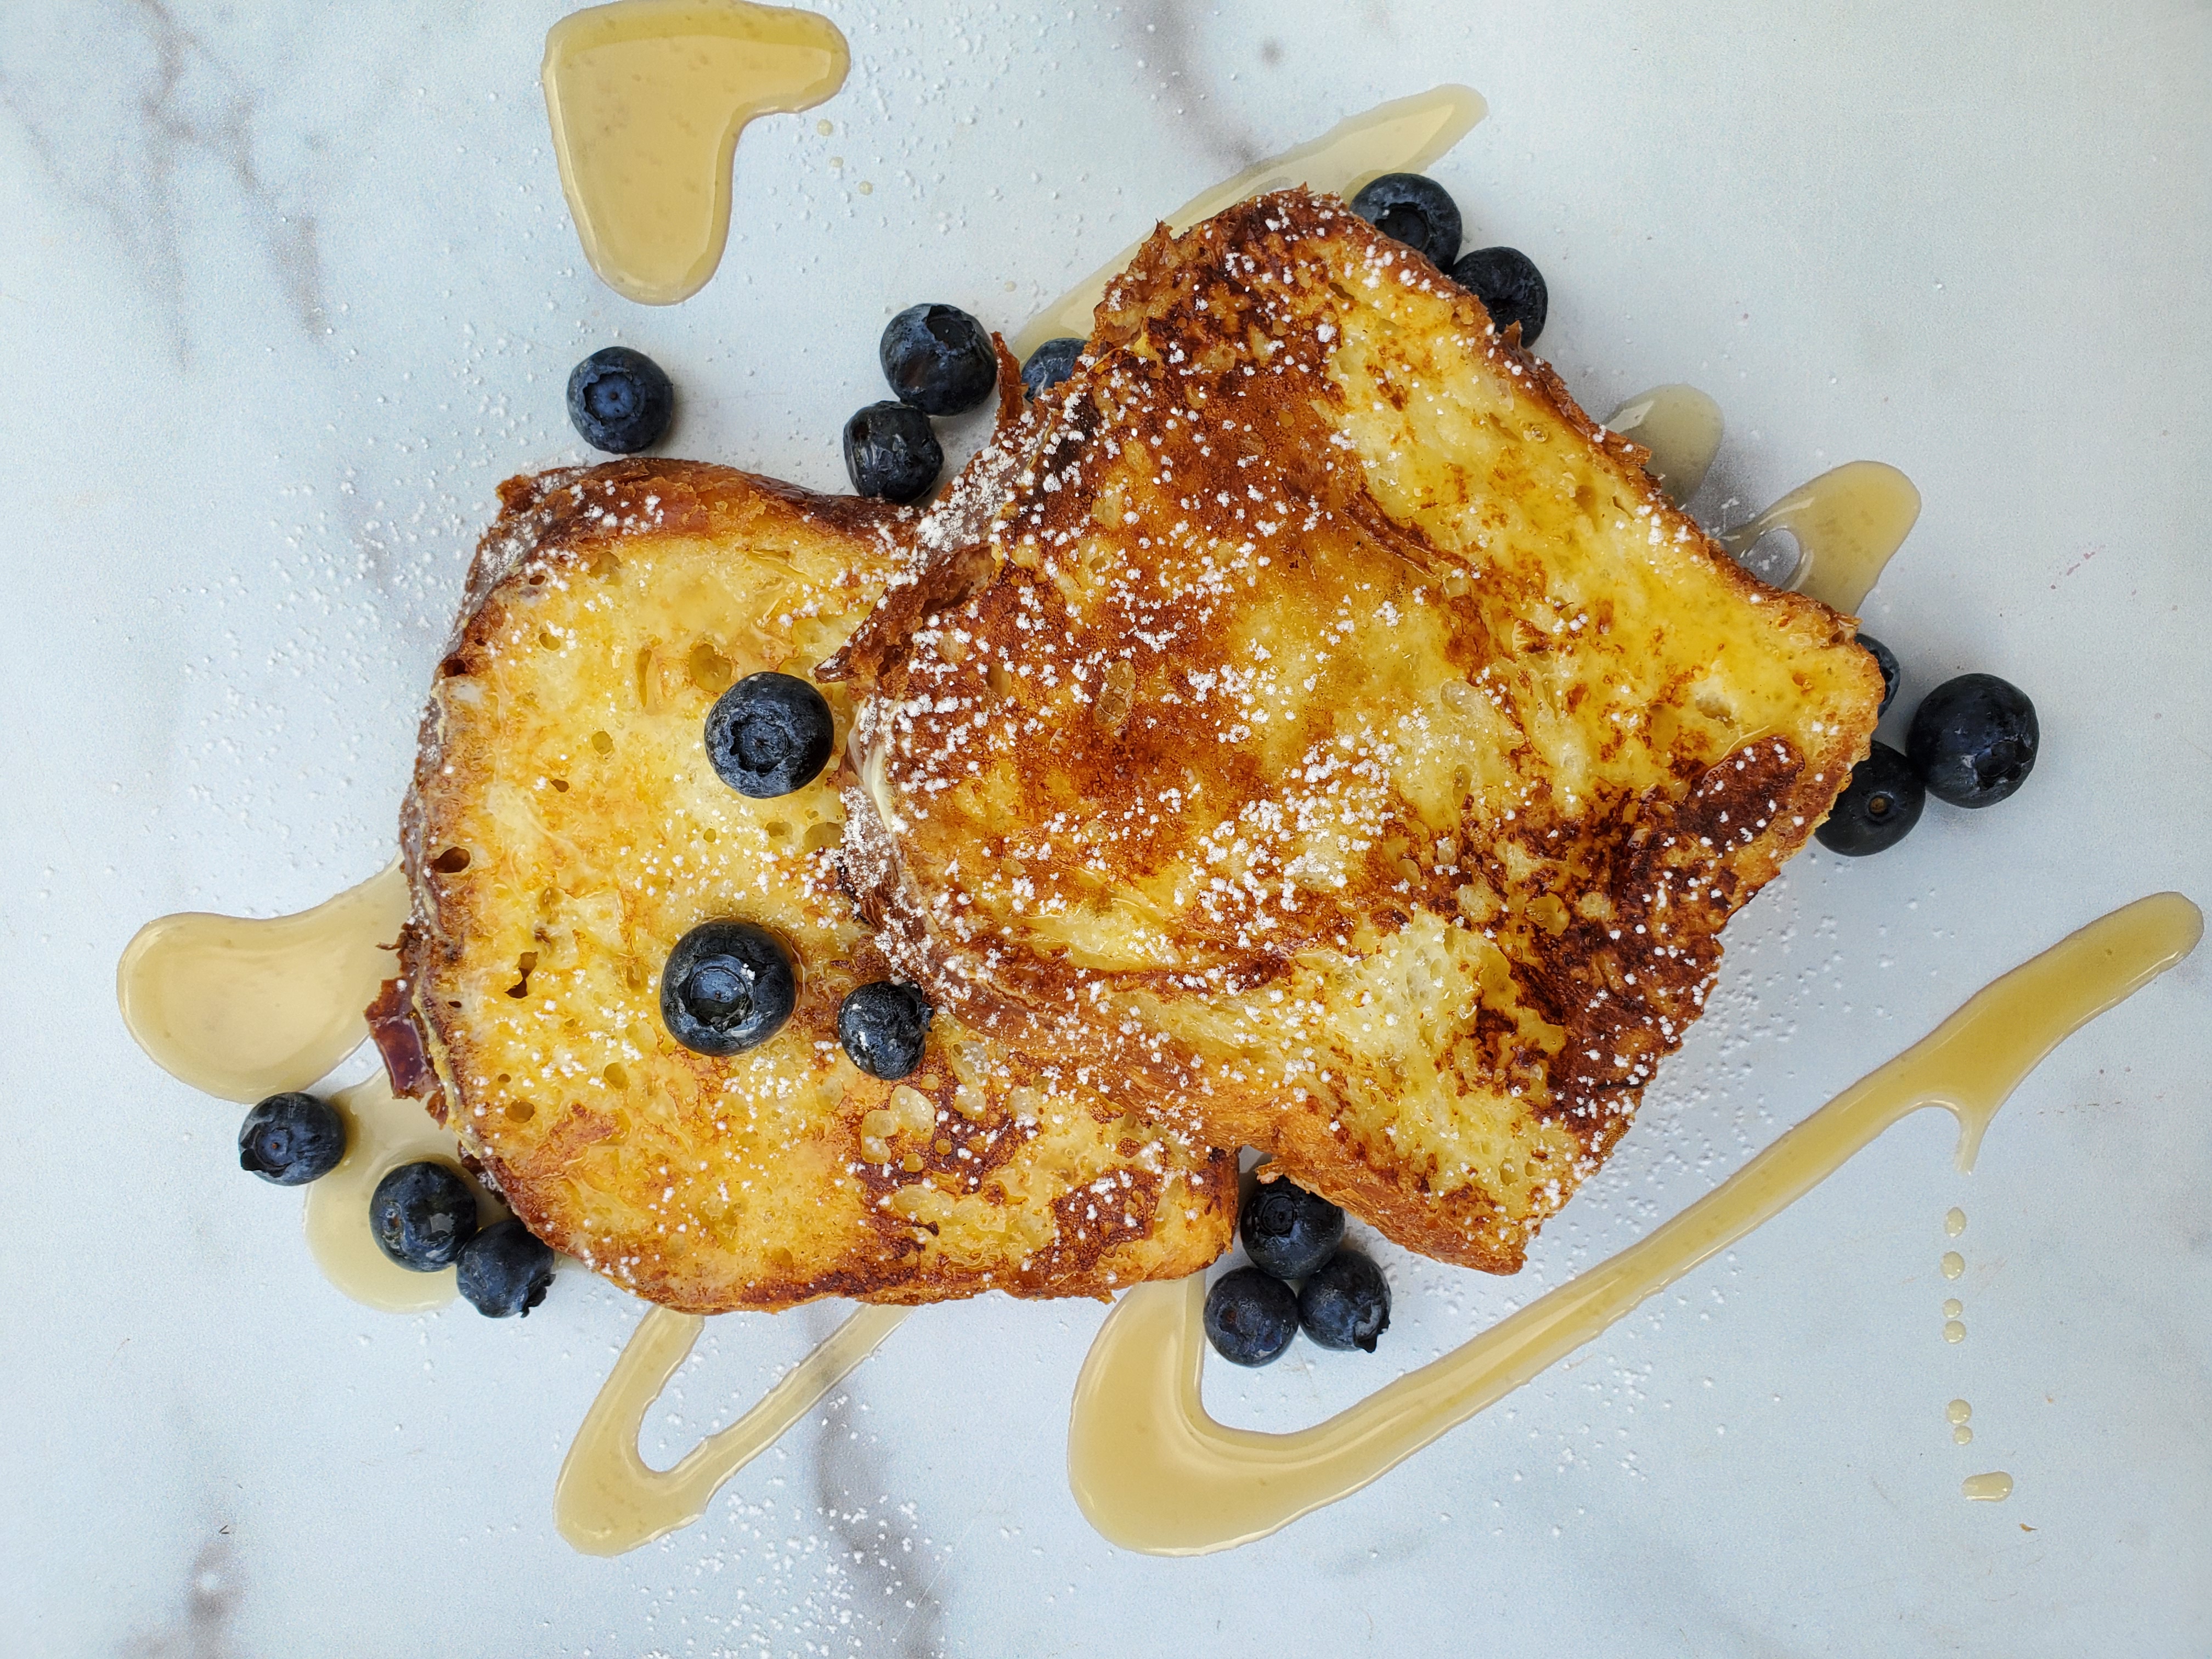 2 slices of French toast with blueberries and a drizzle of maple syrup